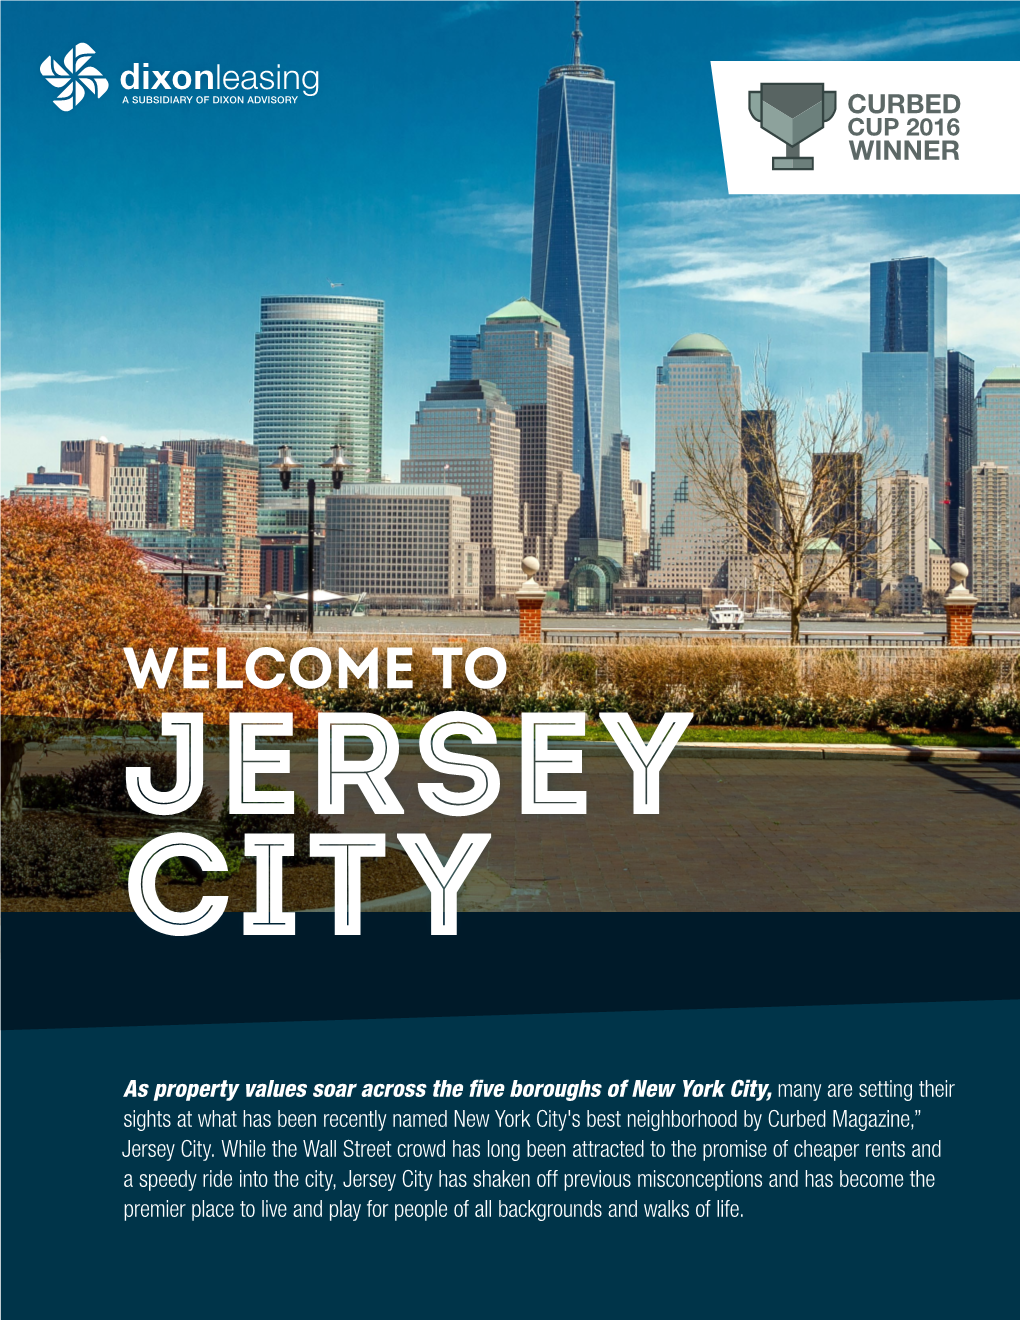 Welcome to Jersey City